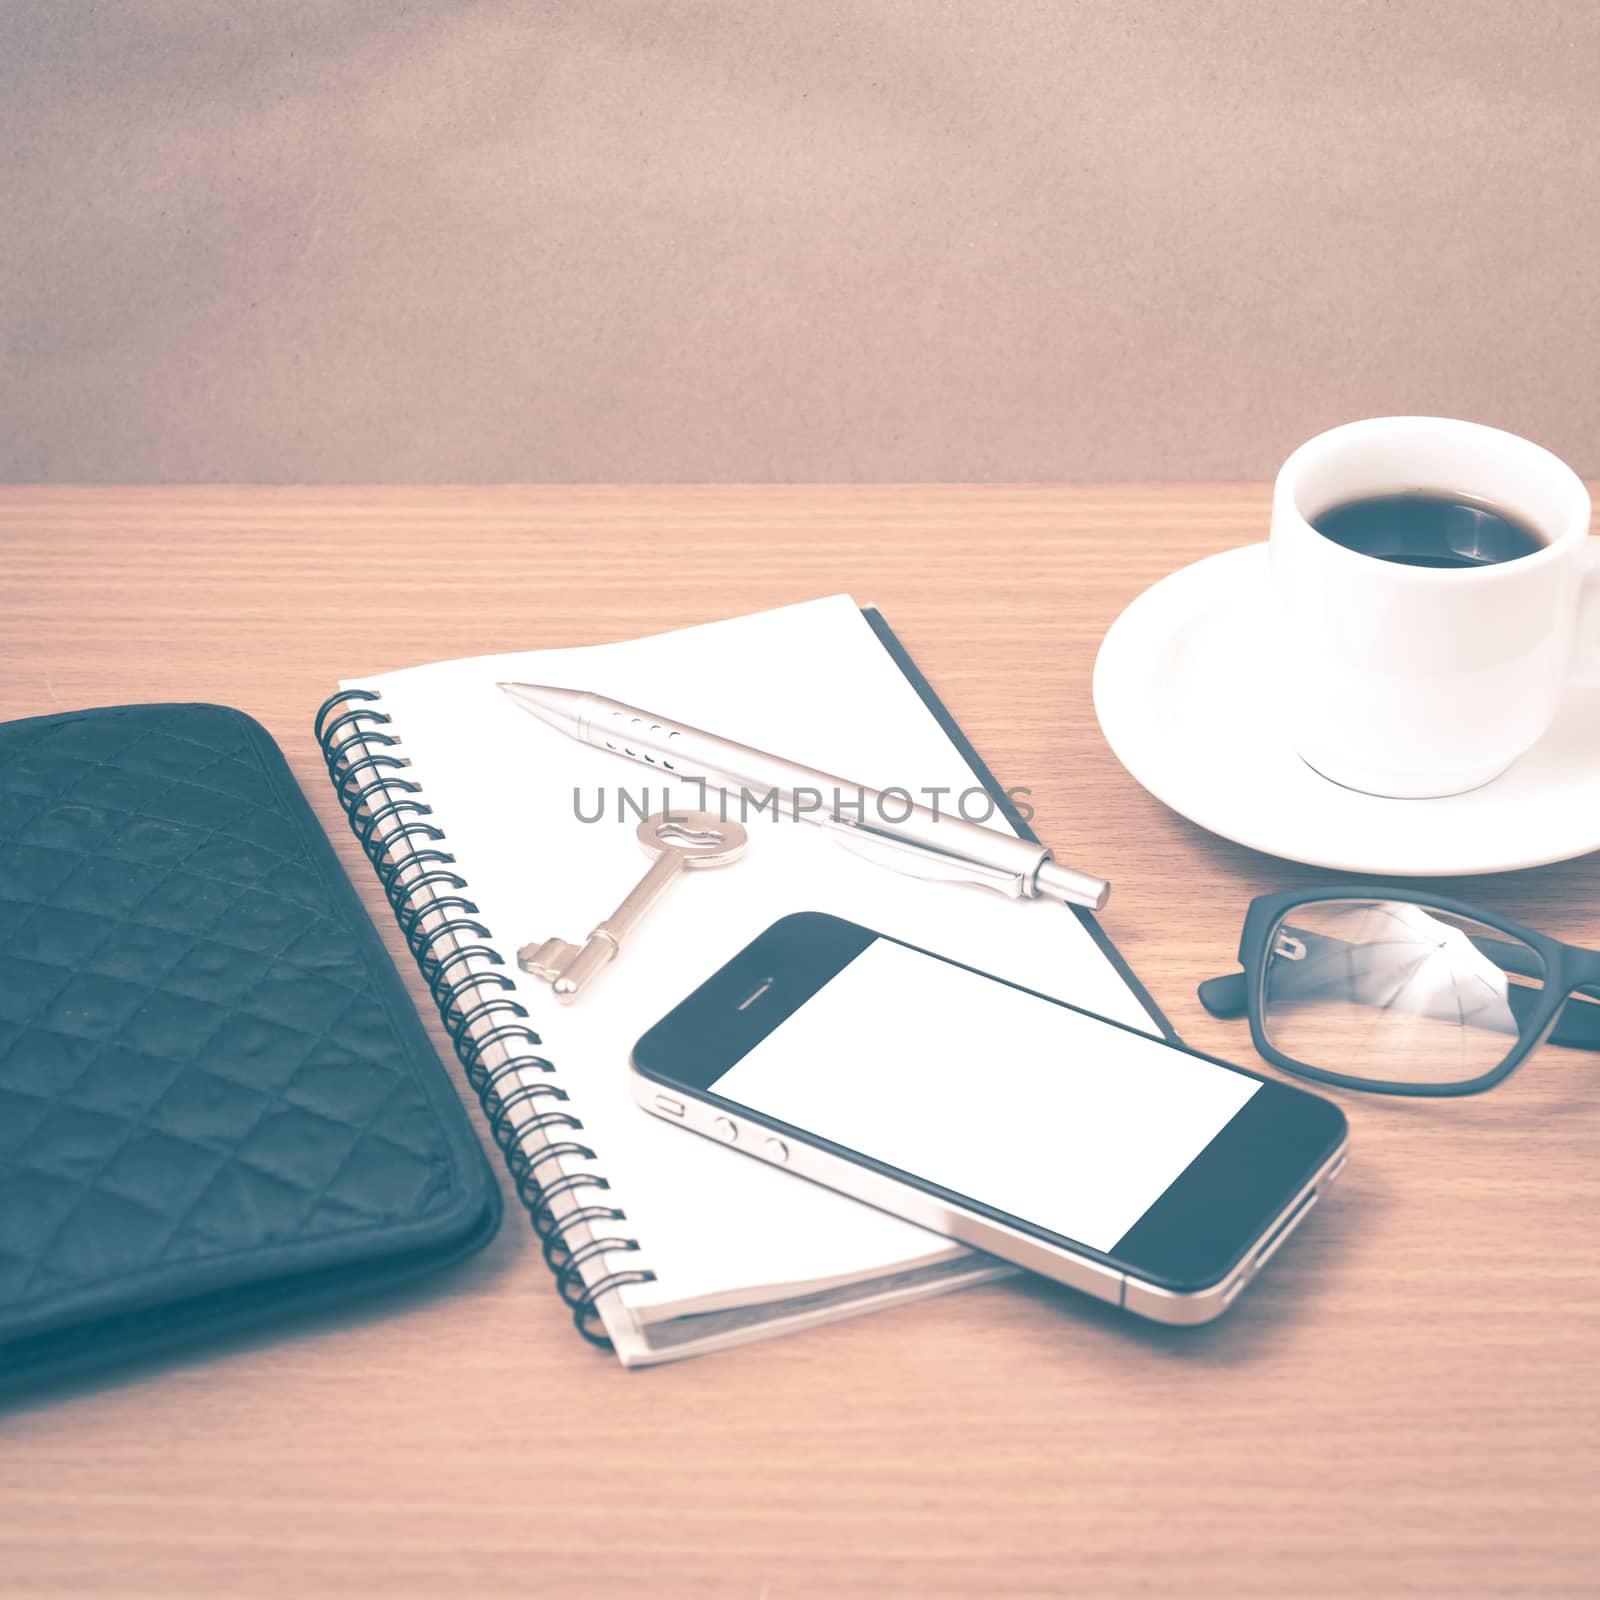 coffee and phone with notepad,key,eyeglasses and wallet on wood table background vintage style